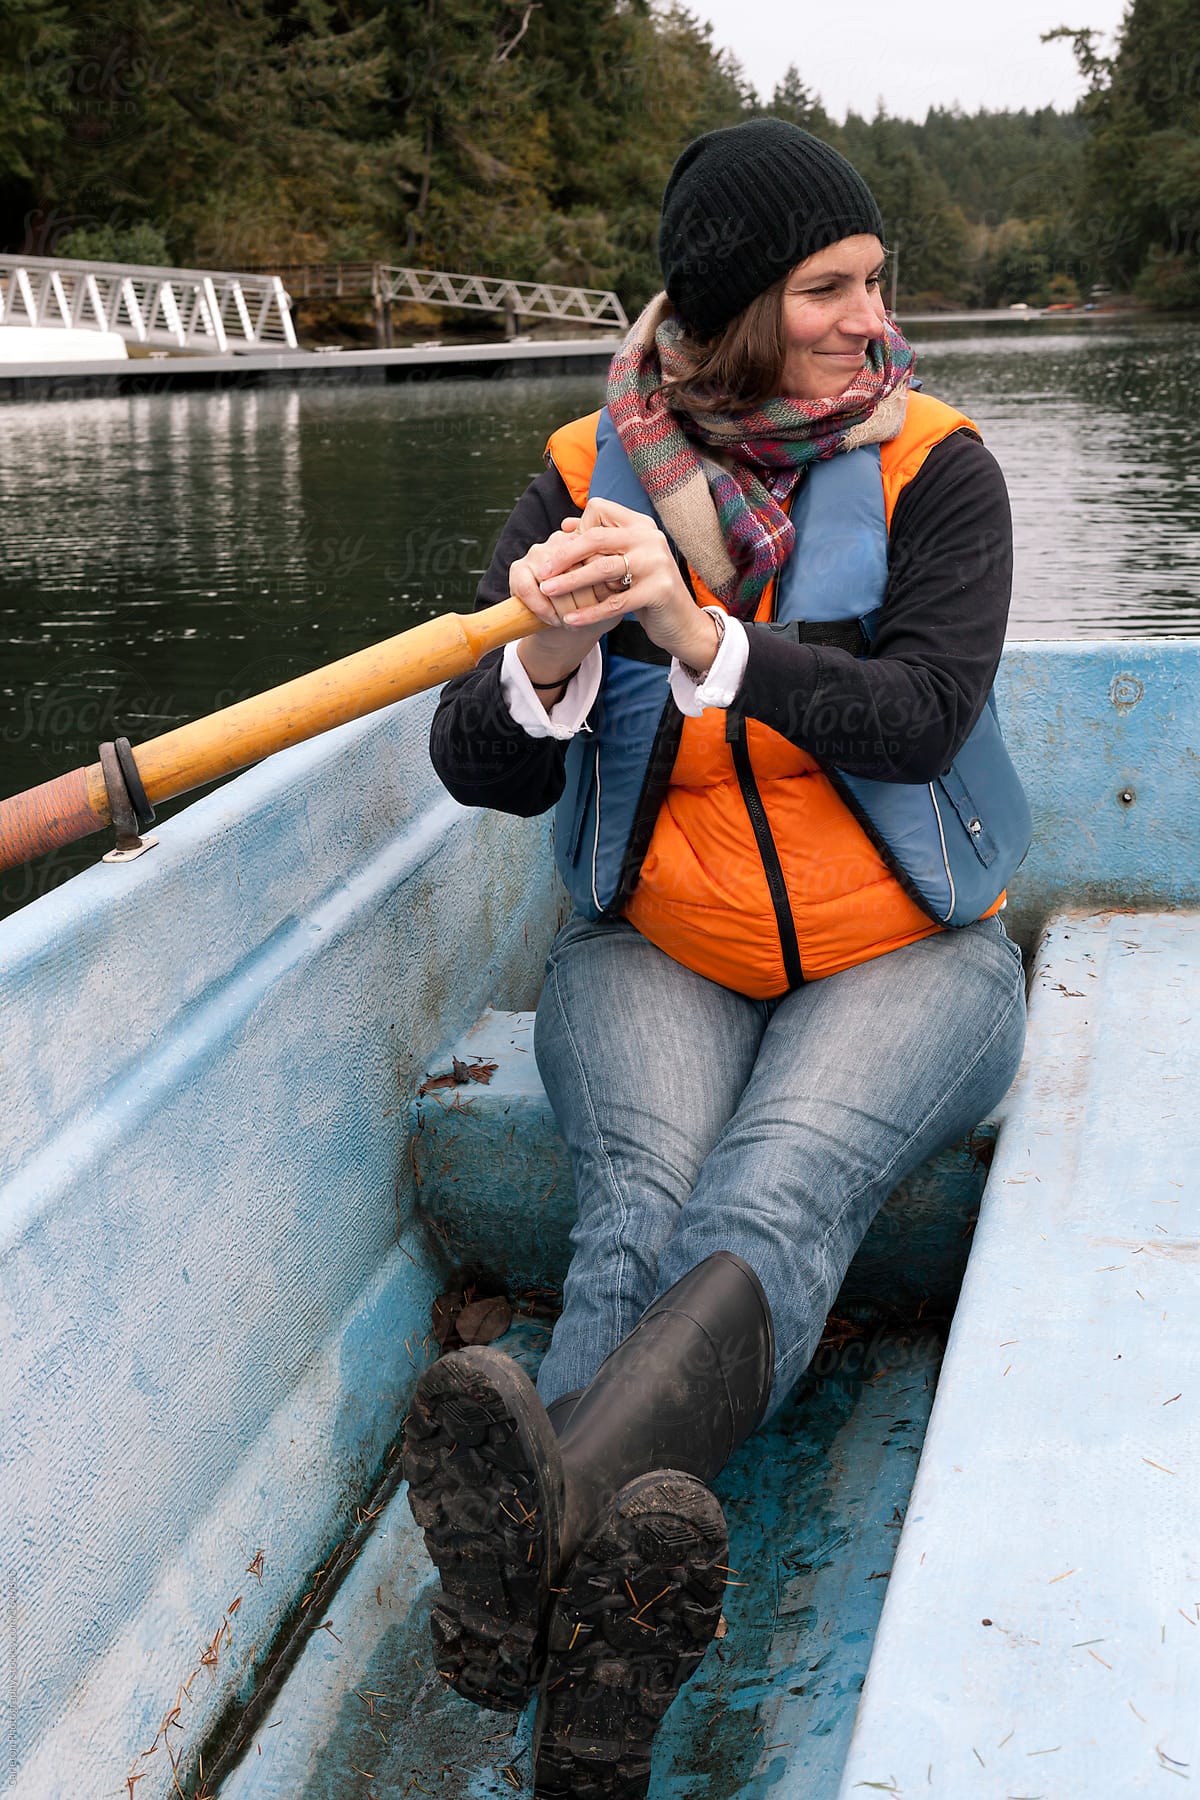 Woman in rowboat takes a break from rowing